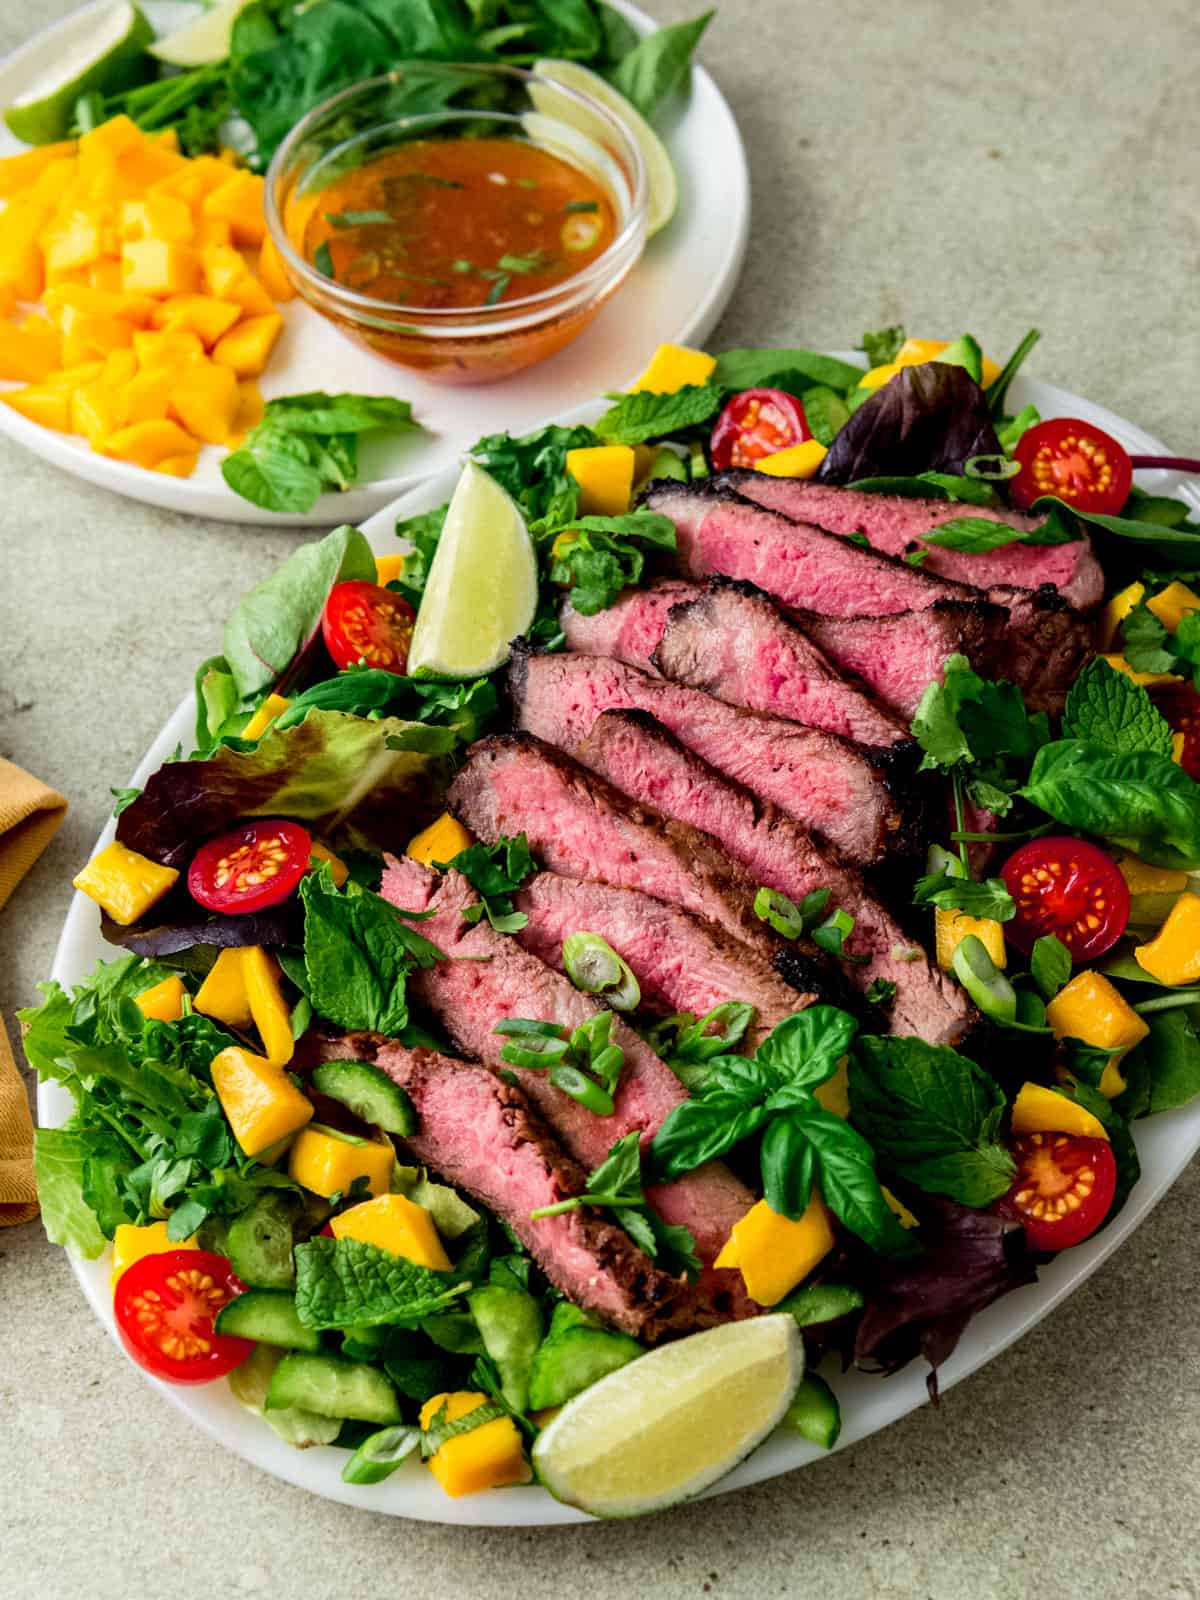 Thai beef salad with mint and chili lime dressing.